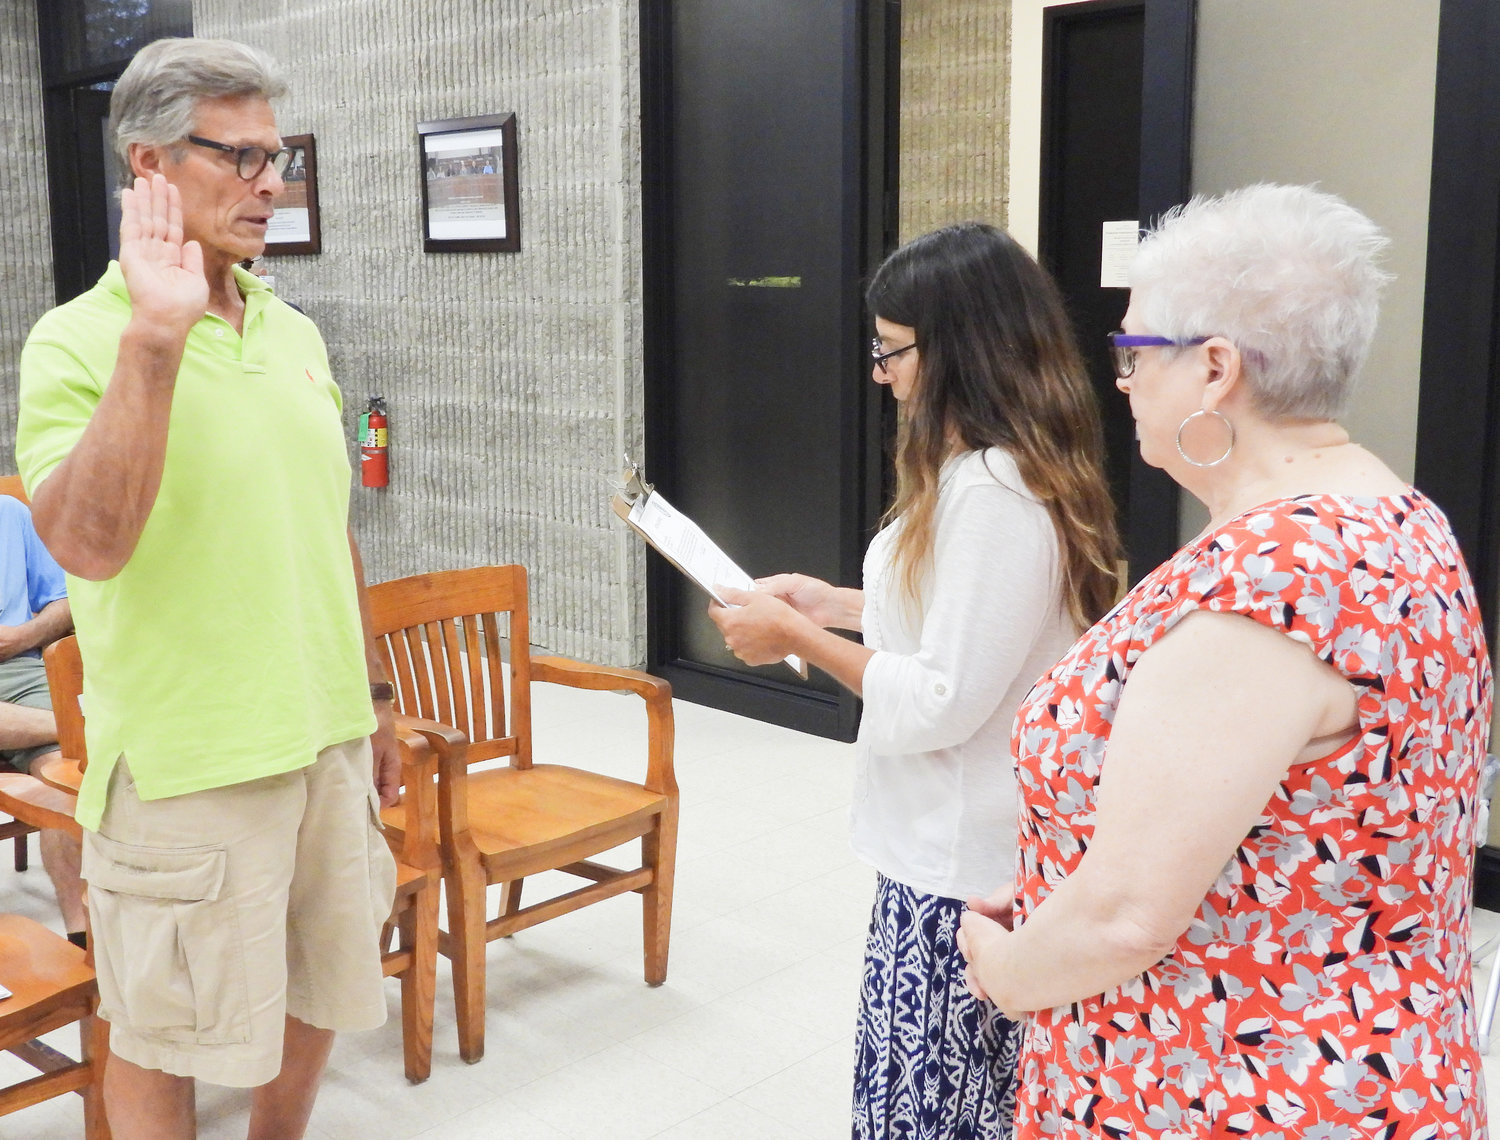 Jim Szczerba, left, is sworn in as the new Ward 1 councilor following the departure of Gary Reisman. Reisman sold his house and no longer lives in Ward 1 but still lives in Oneida, according to Mayor Helen Acker.